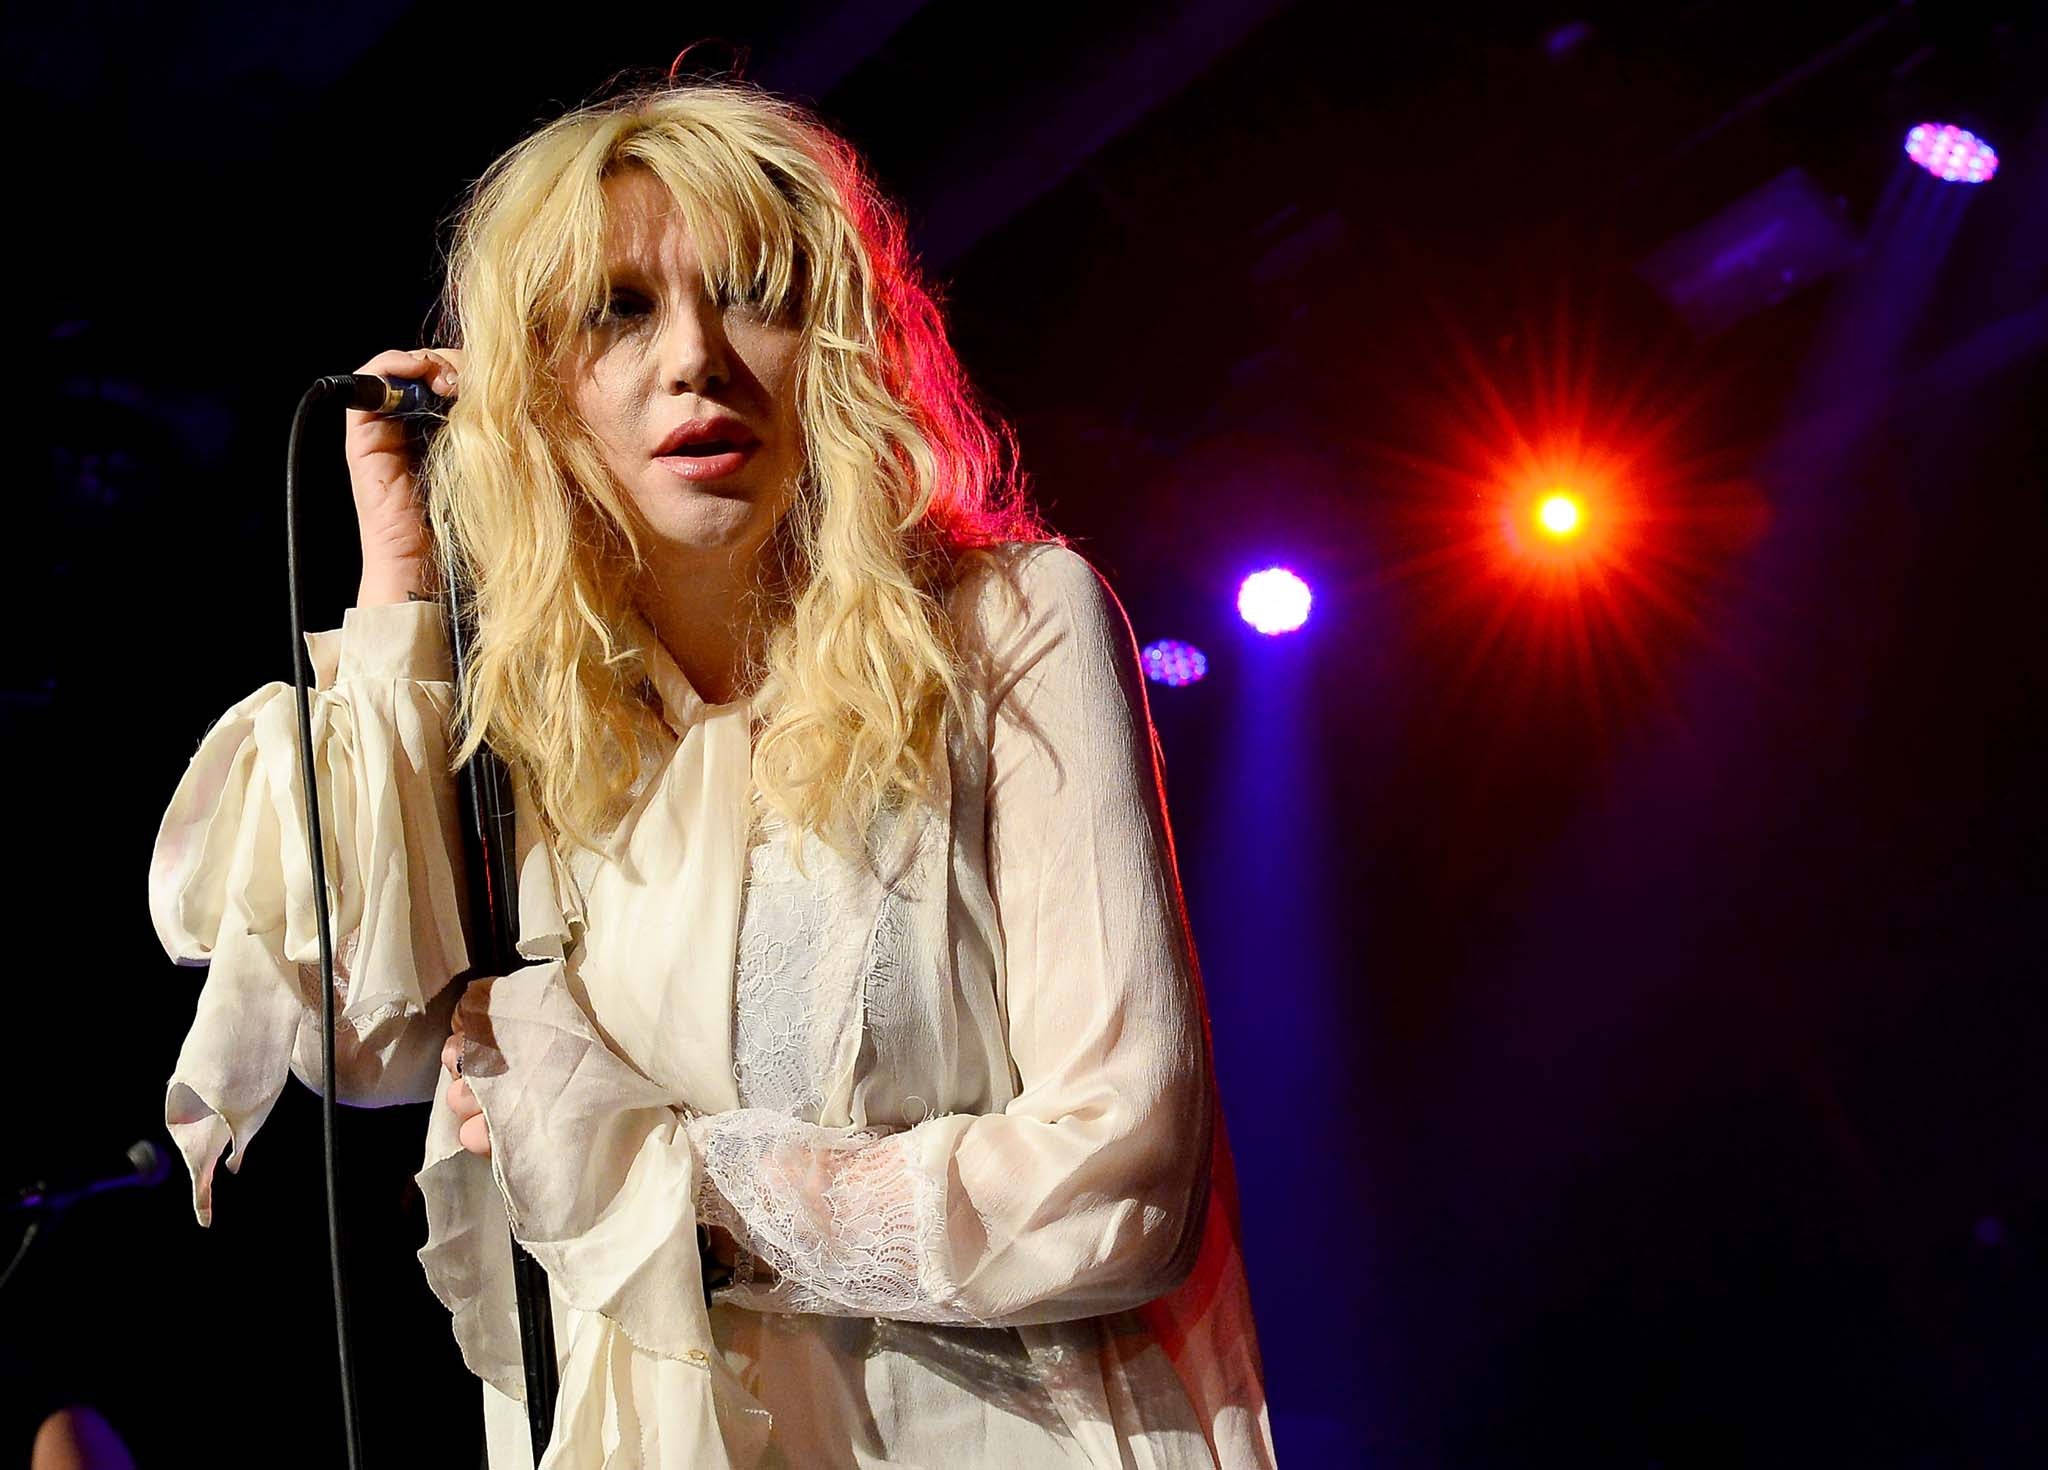 Courtney Love performs on stage inside the Hard Rock Hotel & Casino